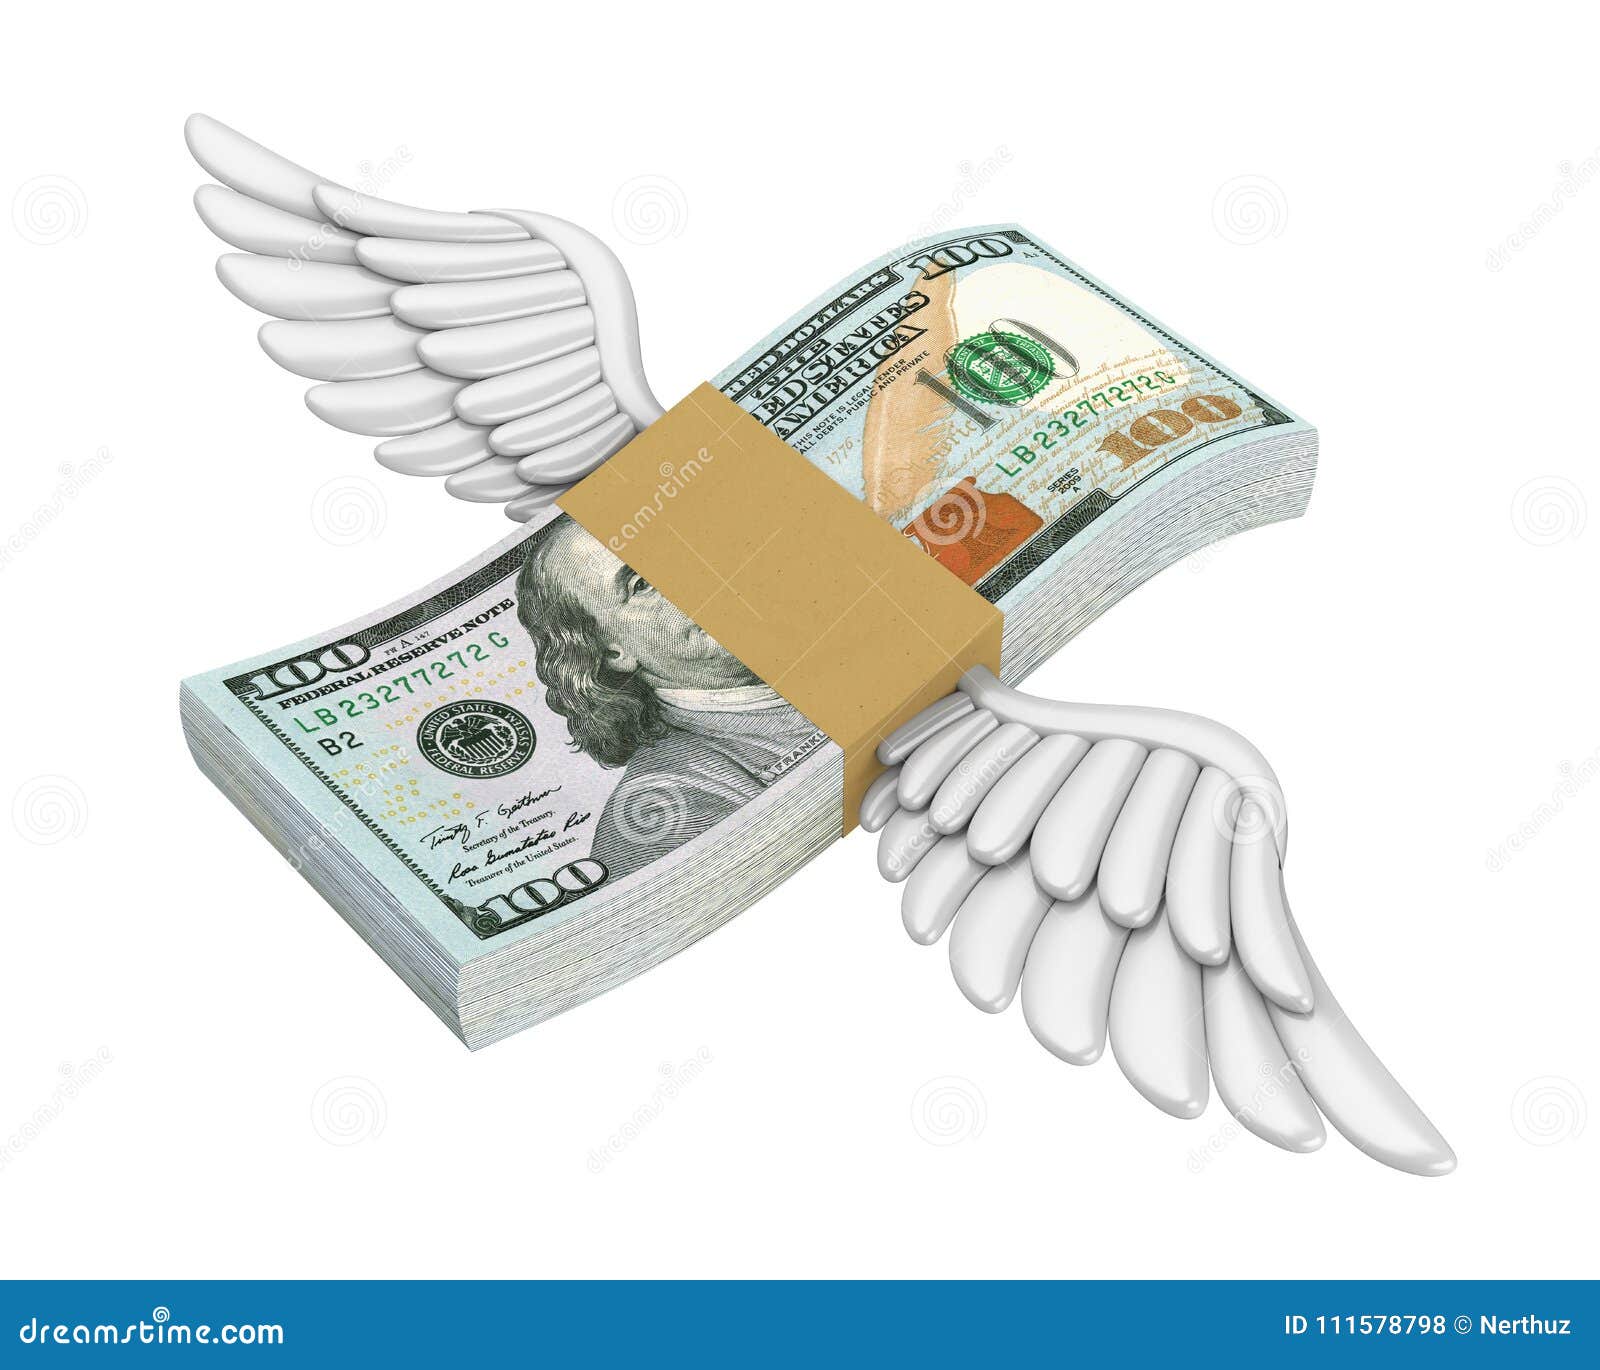 moneybag with wings